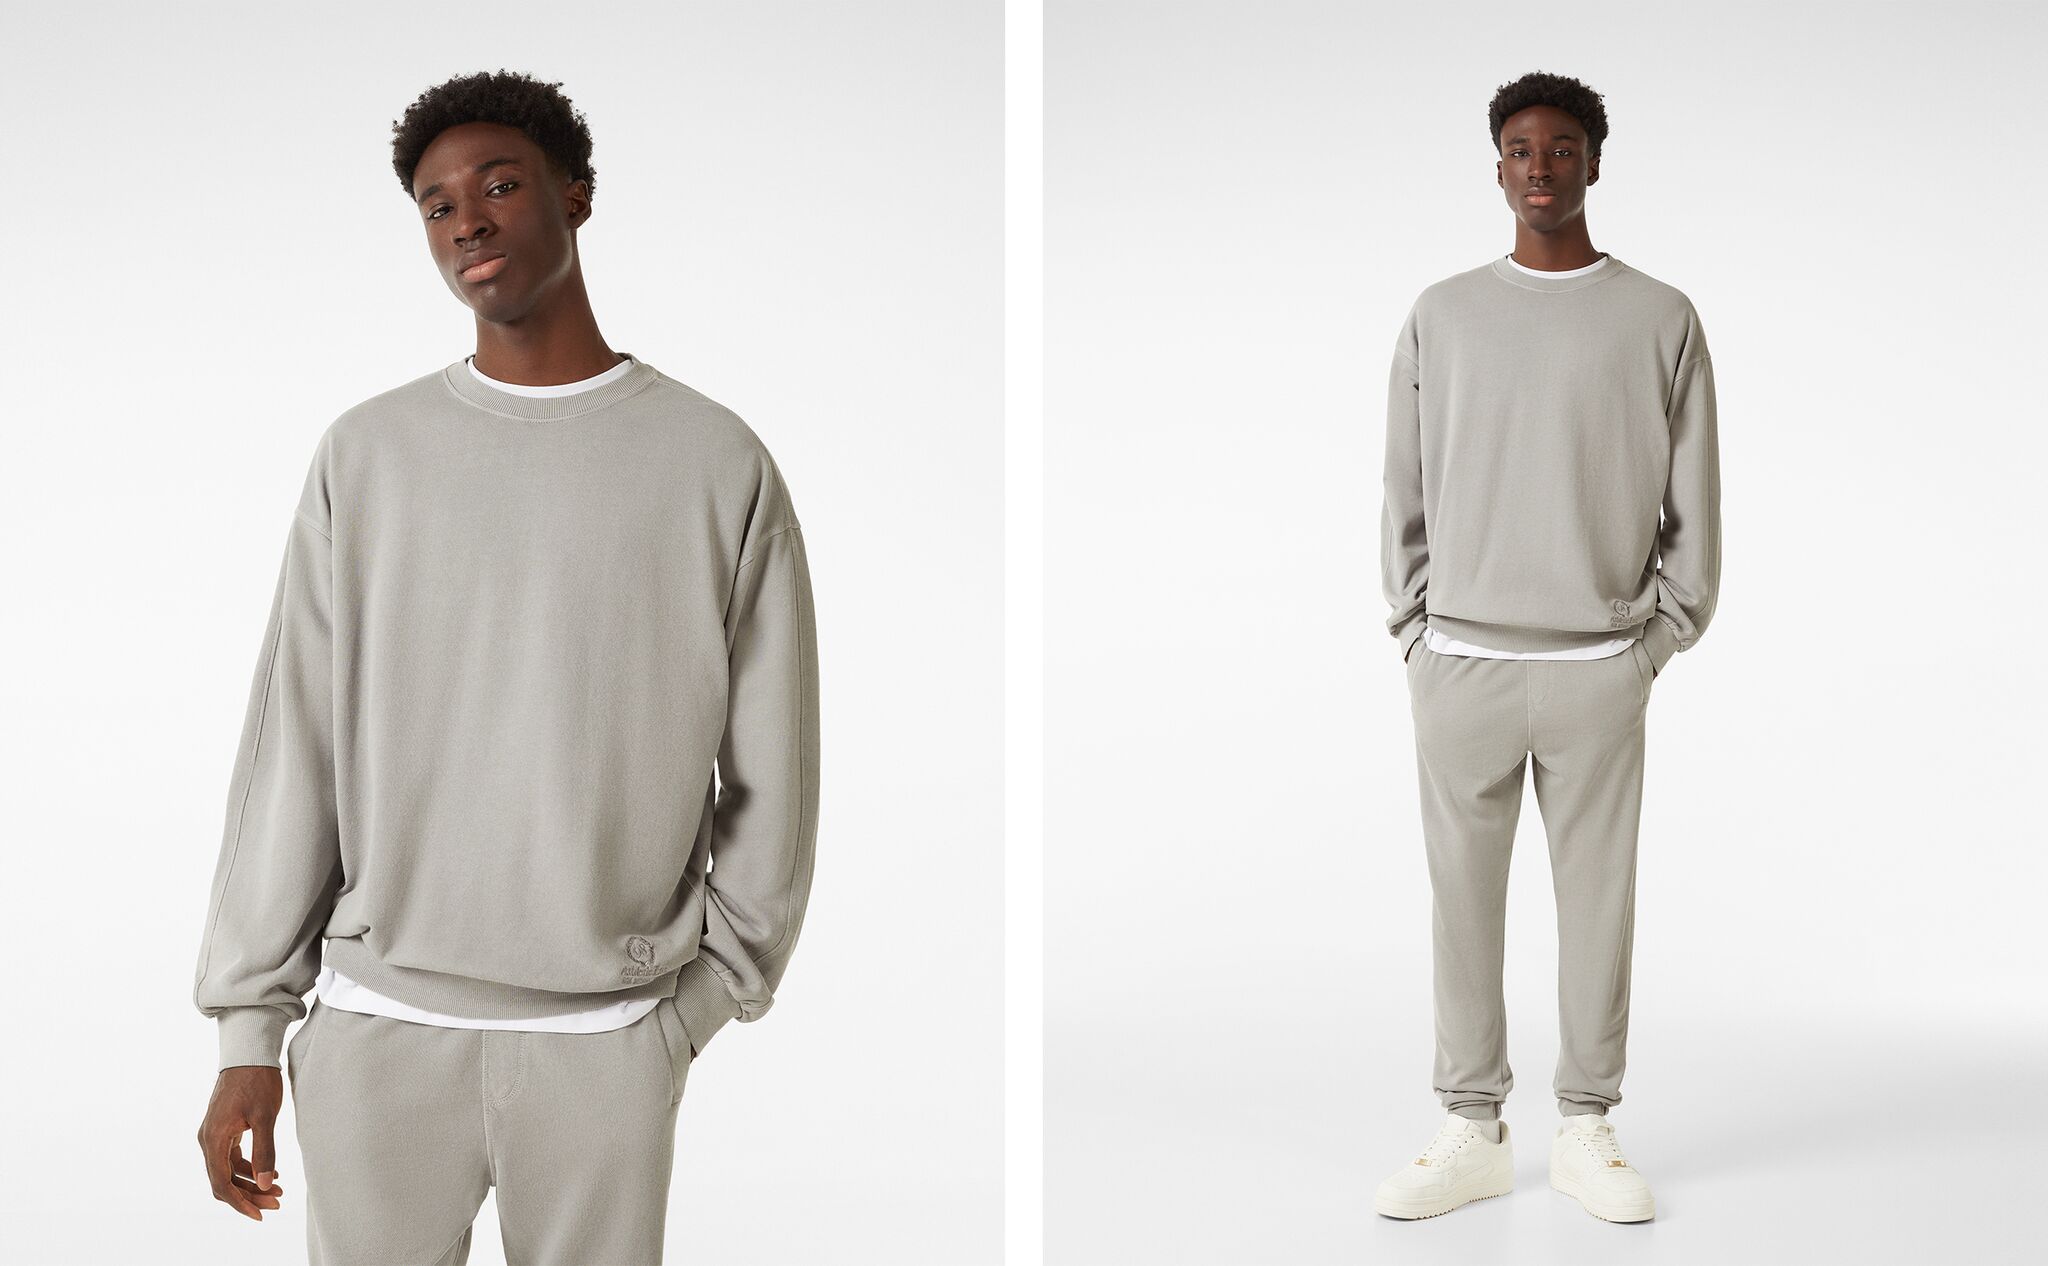 Faded-effect sweatshirt and trousers set